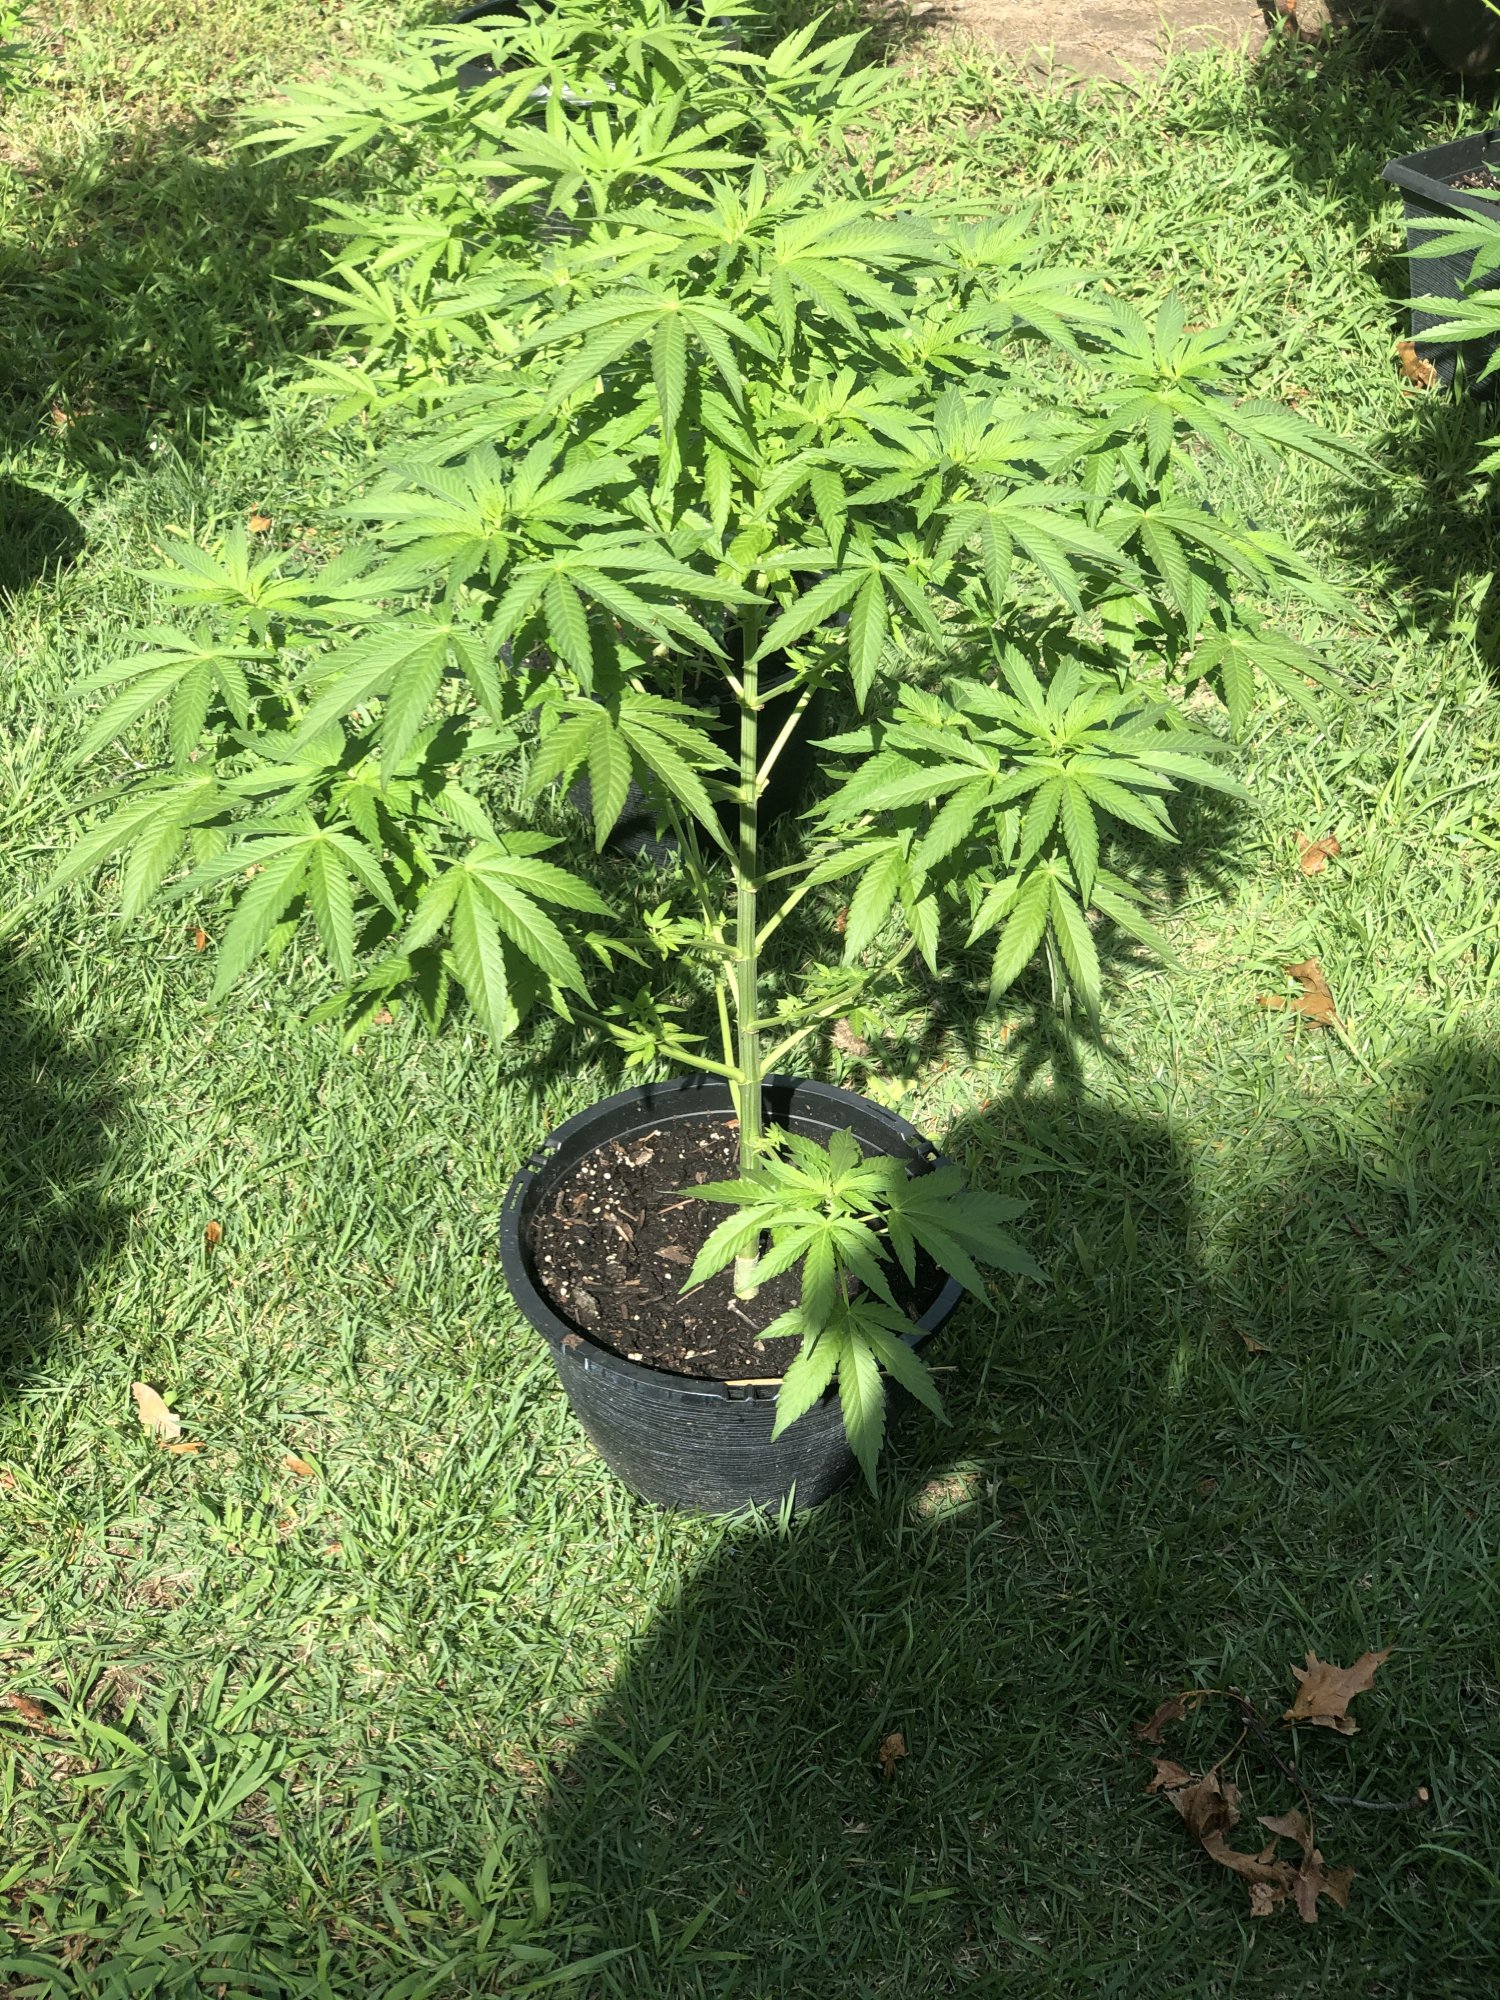 First time outdoor still learning any tips or advise greatly appreciated 5